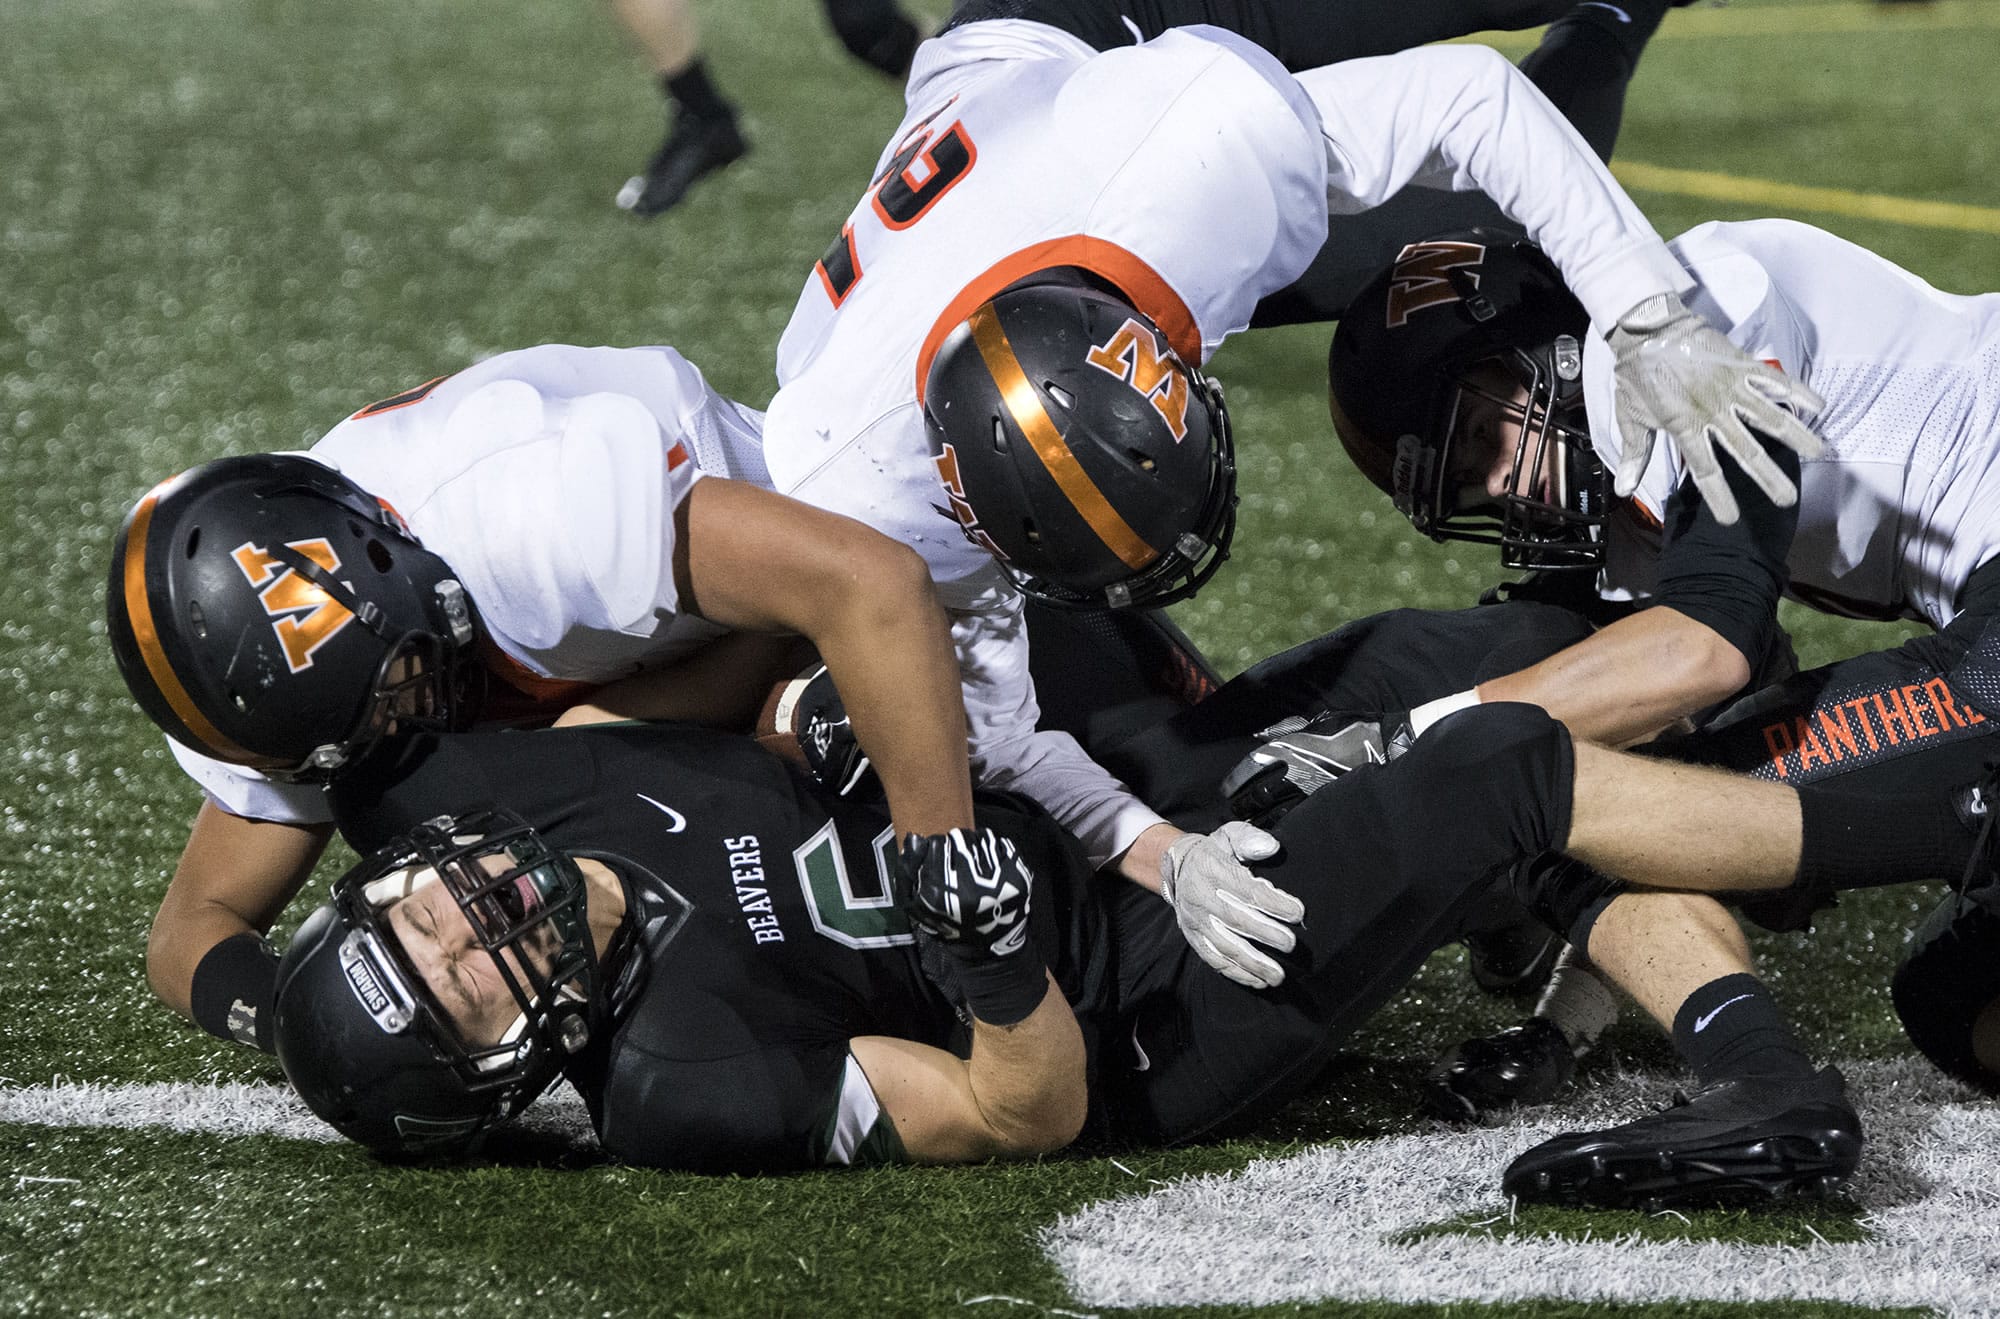 Woodland's Christian Yager (6) is taken down by Washougal's Brenden Brock (51), Gus Shelley (31) and Dalton Payne (9) during Friday night's game at Woodland High School on Oct. 13, 2017. Woodland defeated Washougal 20-7.